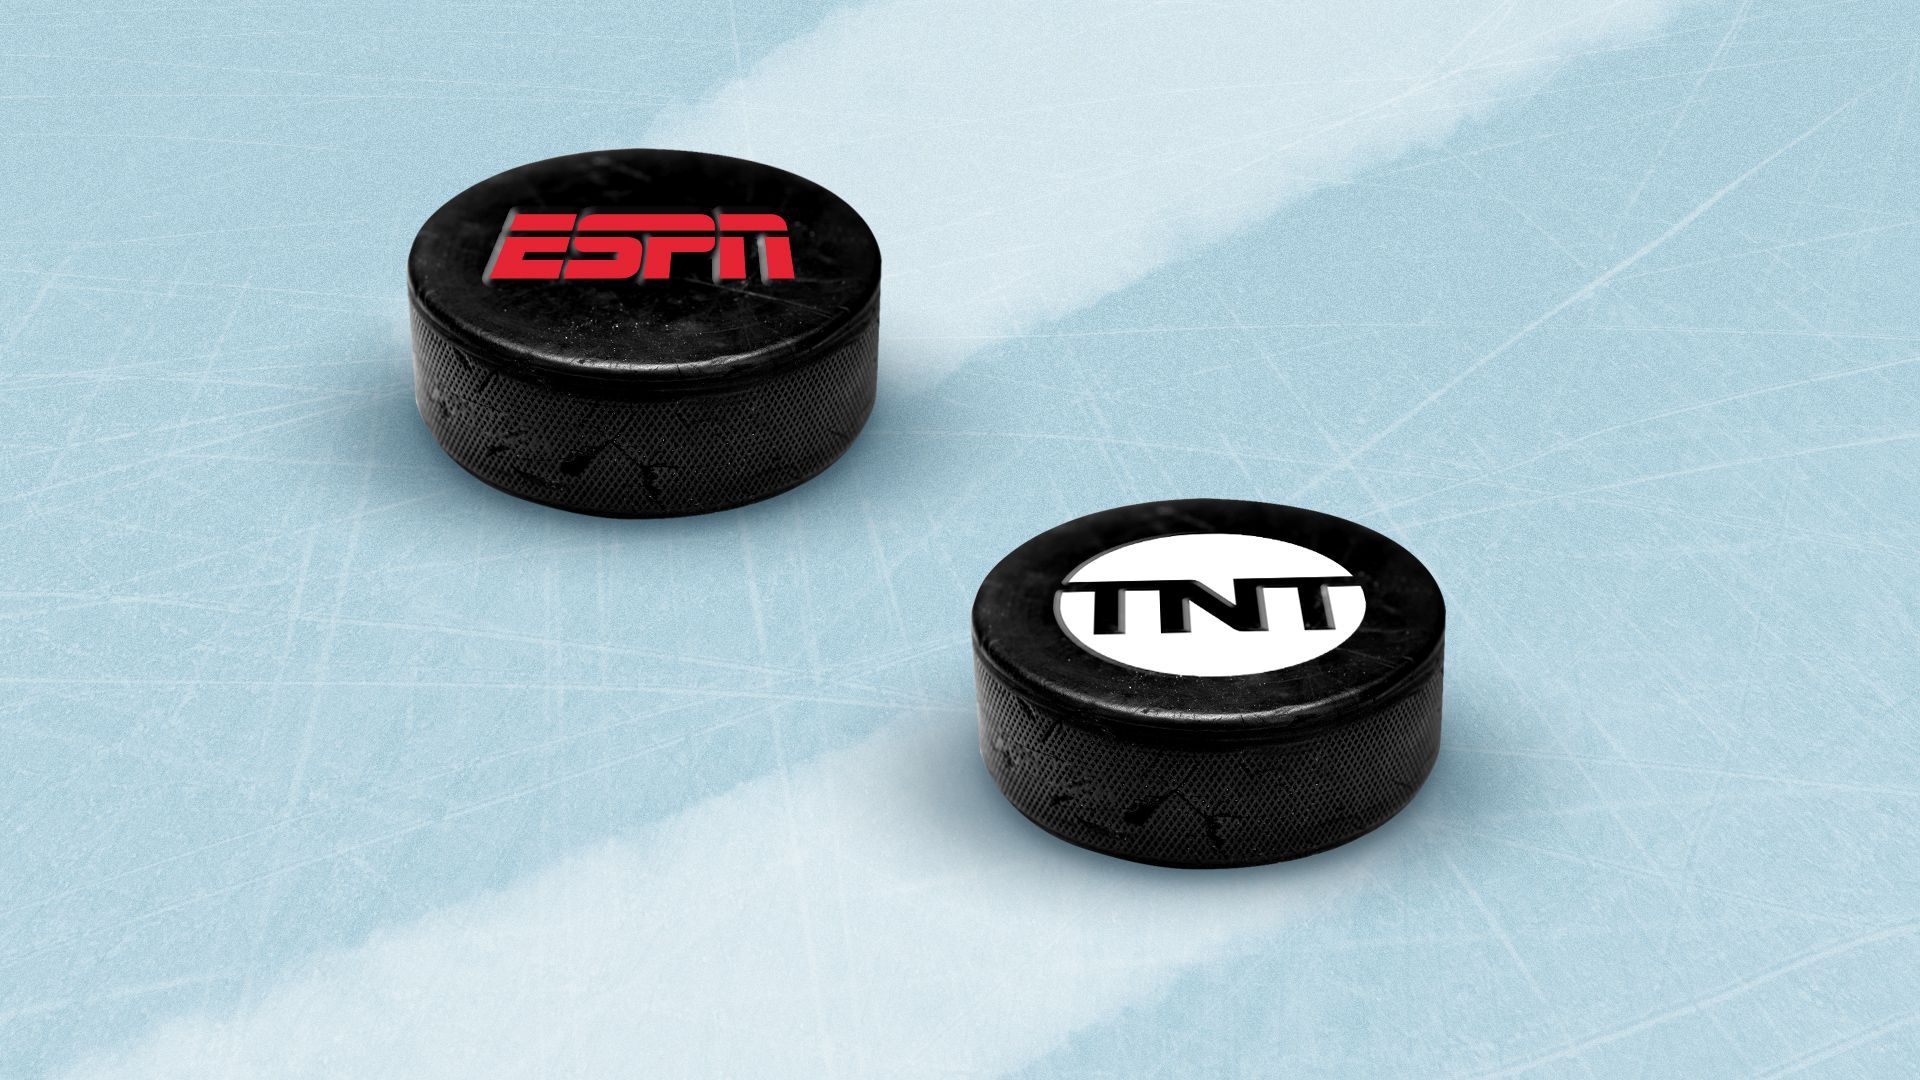 Illustration of two hockey pucks with the ESPN and TNT logos on them, sliding across the ice